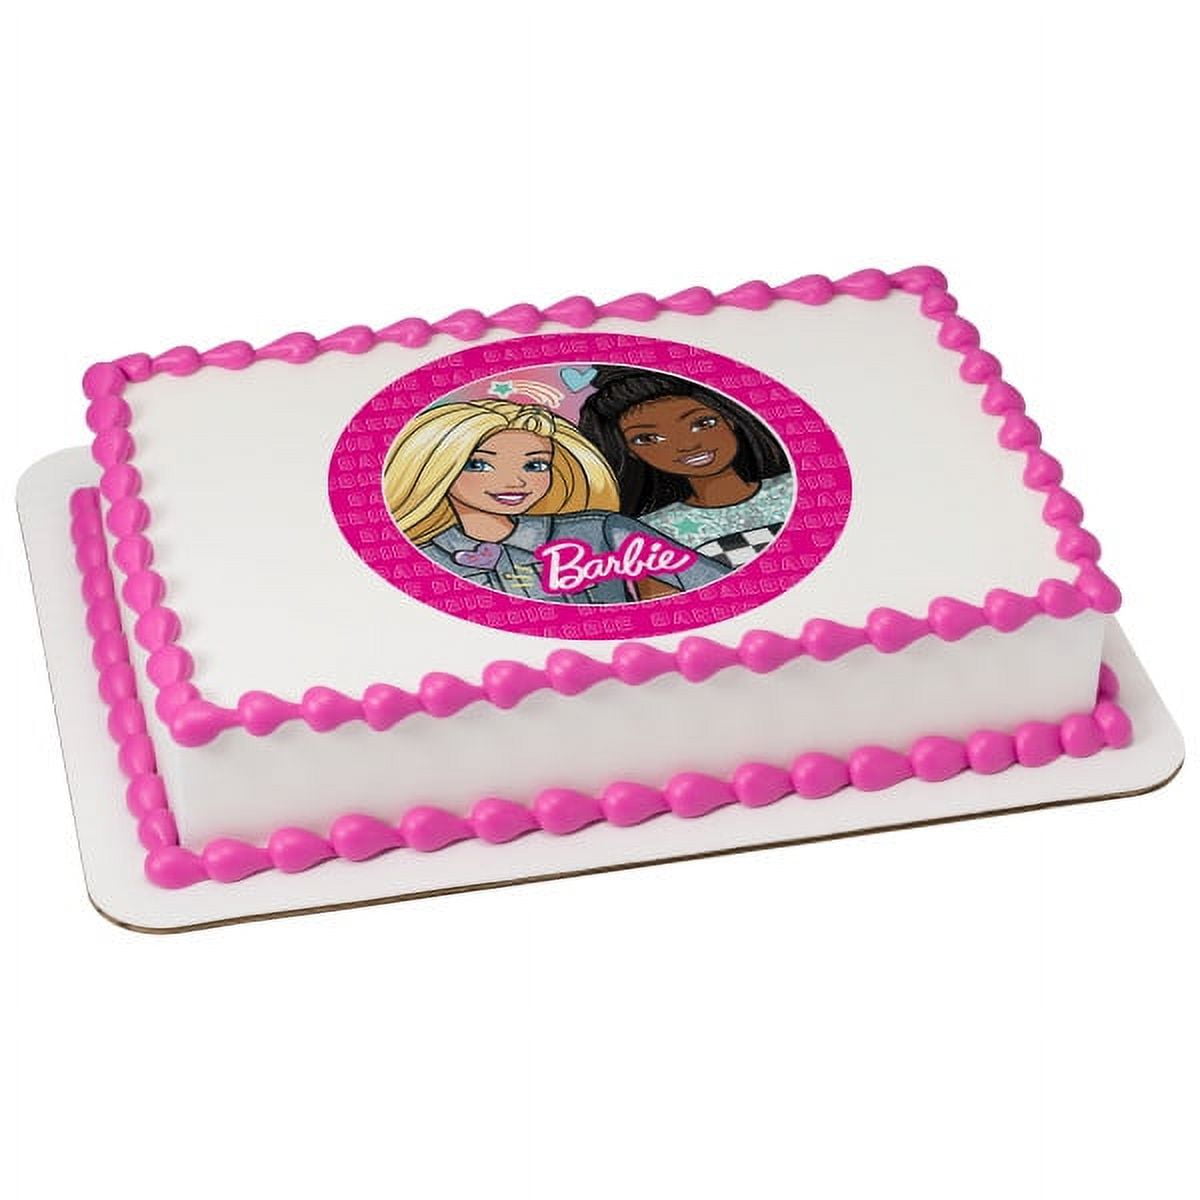 barbie a mermaid's tale edible cake image decoration cake topper